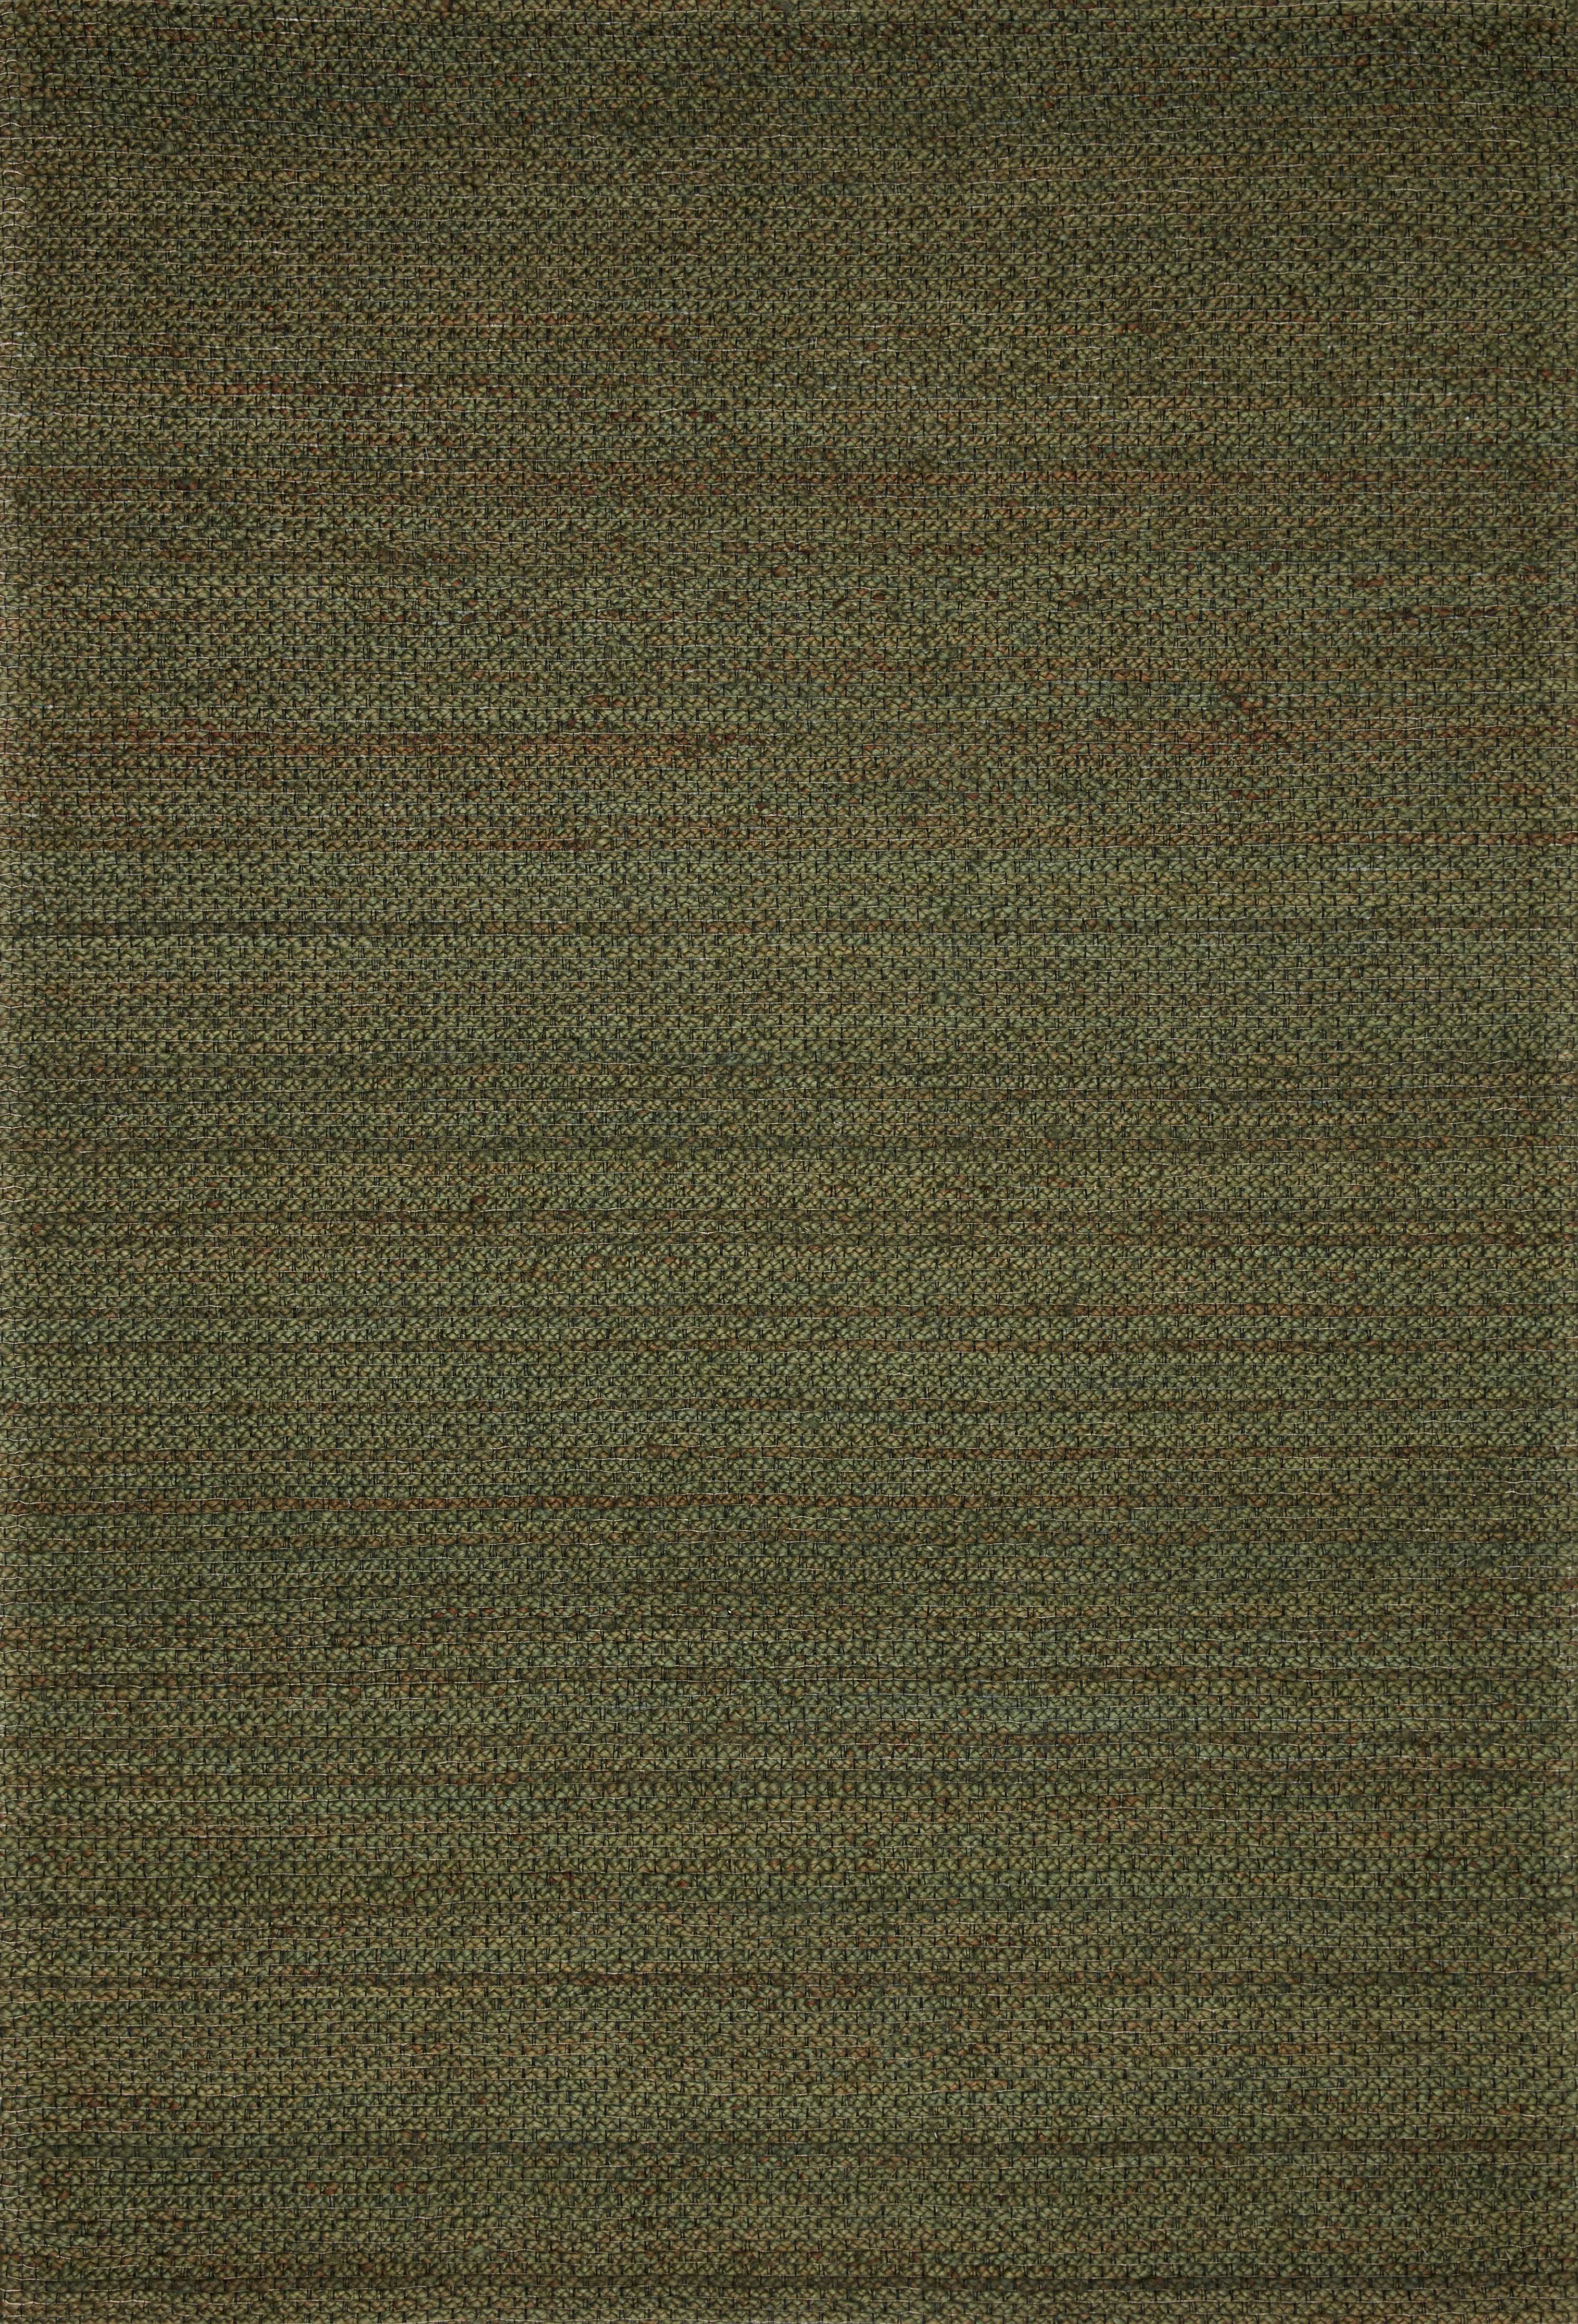 Lily Rug, Green, 5' x 7'6" - Image 0